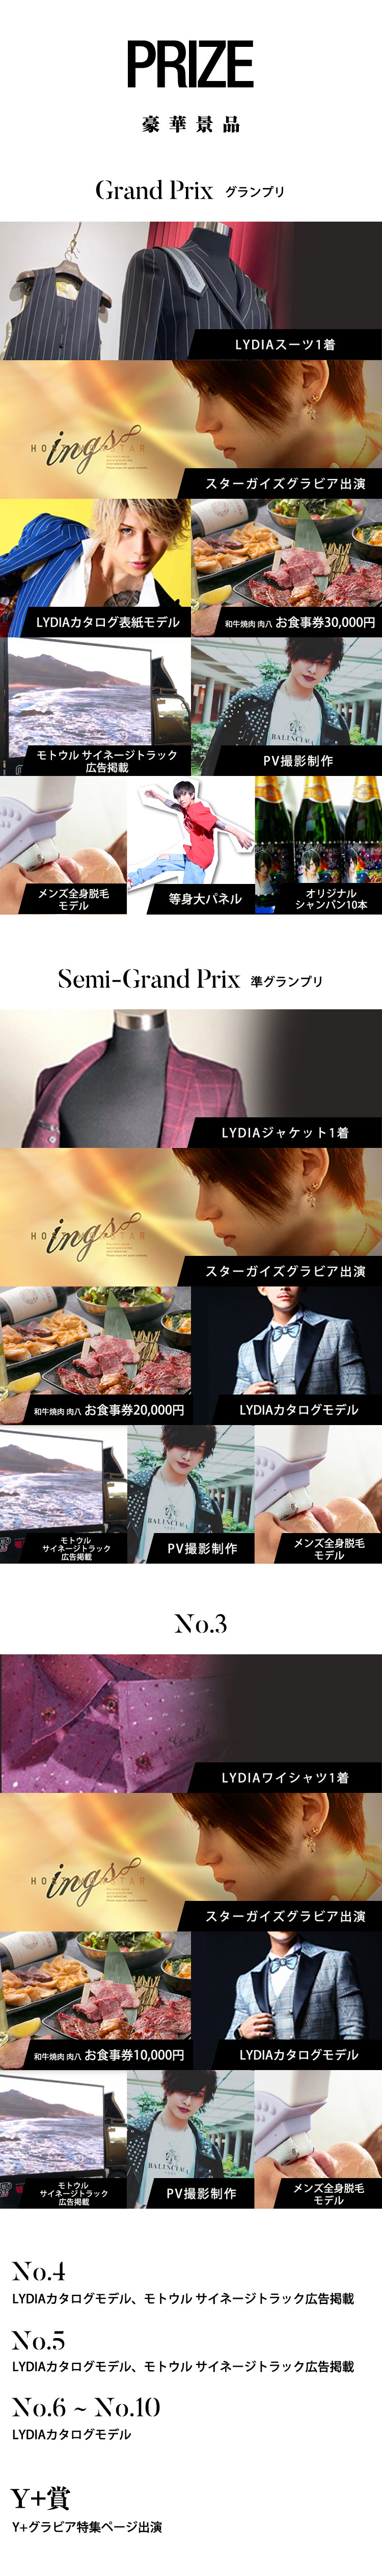 LYDIA SUIT COLLECTION 決勝戦